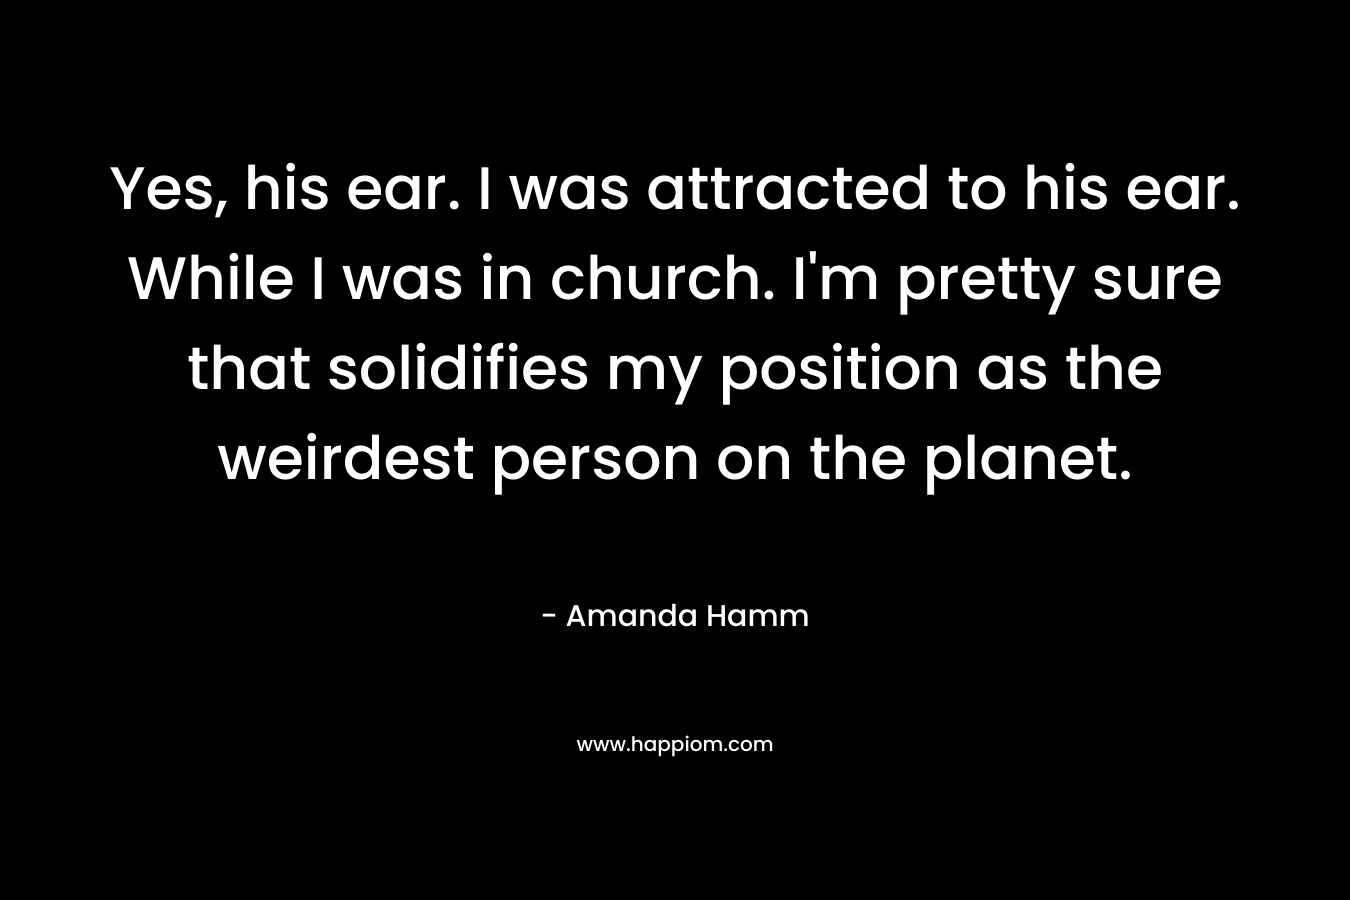 Yes, his ear. I was attracted to his ear. While I was in church. I’m pretty sure that solidifies my position as the weirdest person on the planet. – Amanda Hamm